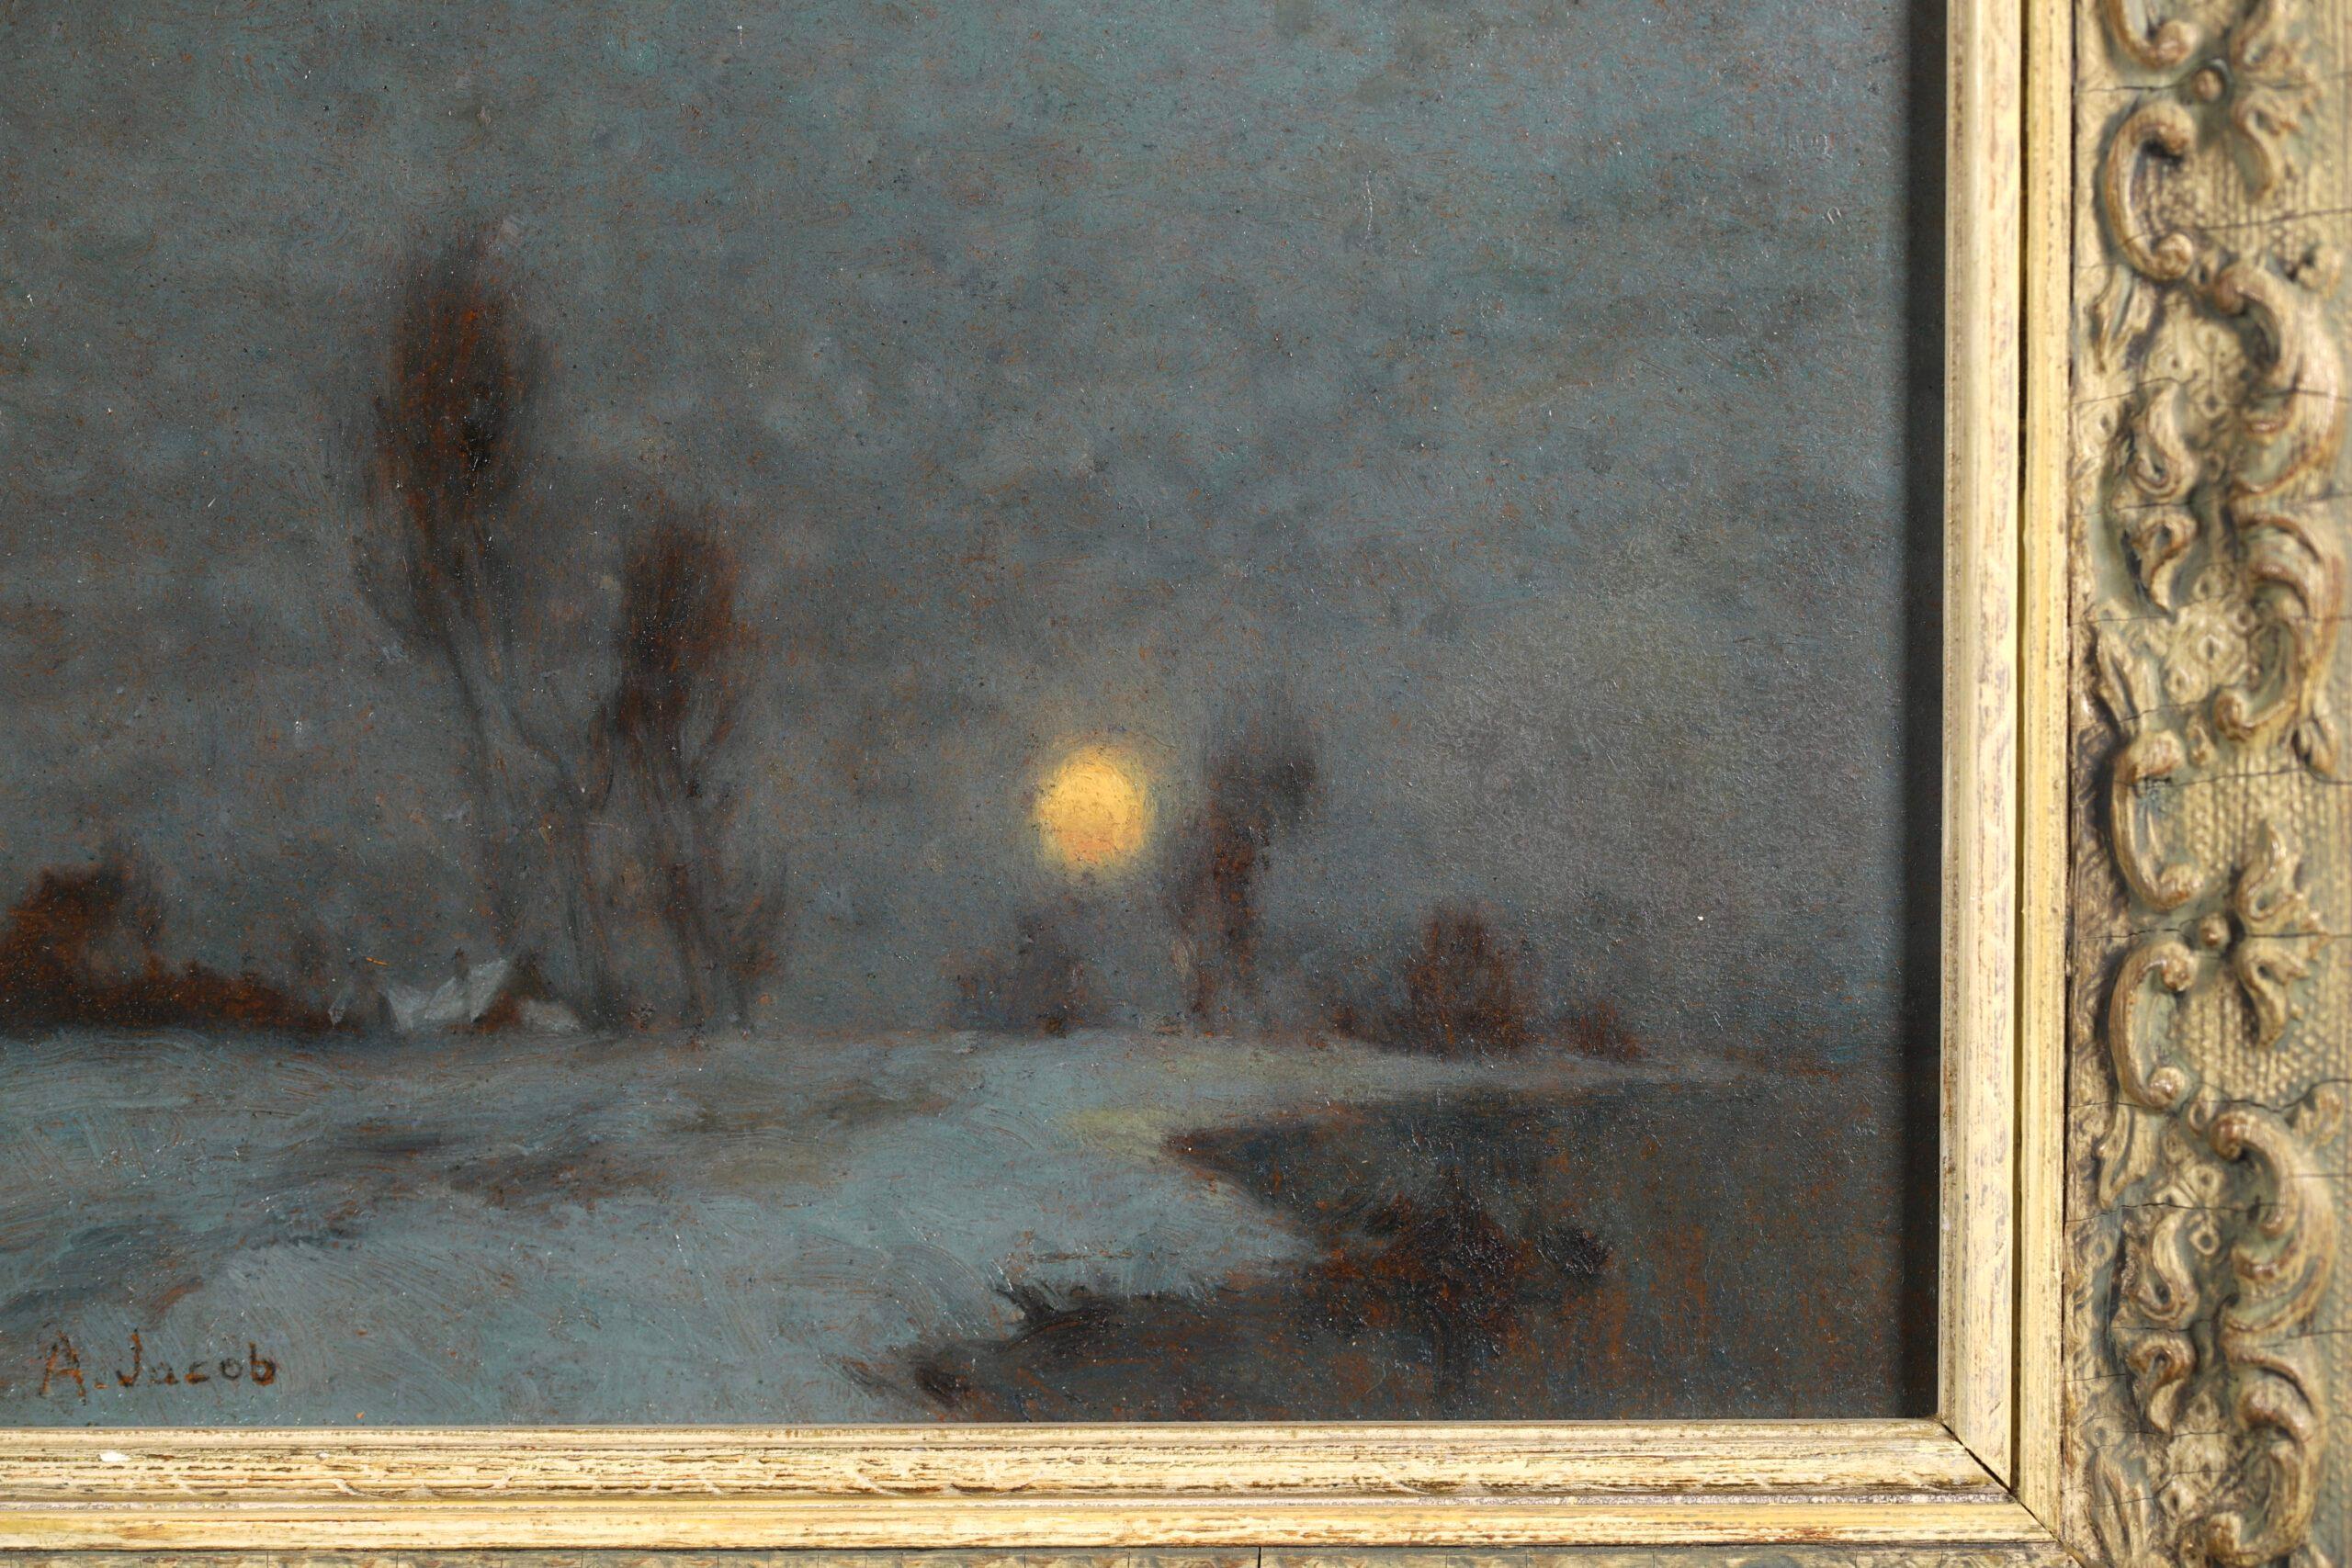 Signed oil on board landscape circa 1930 by popular French impressionist painter Alexandre Louis Jacob. The piece depicts a view of the River Seine at dusk. The moon sits low in the grey sky glowing yellow, and below it are bare trees and the bank